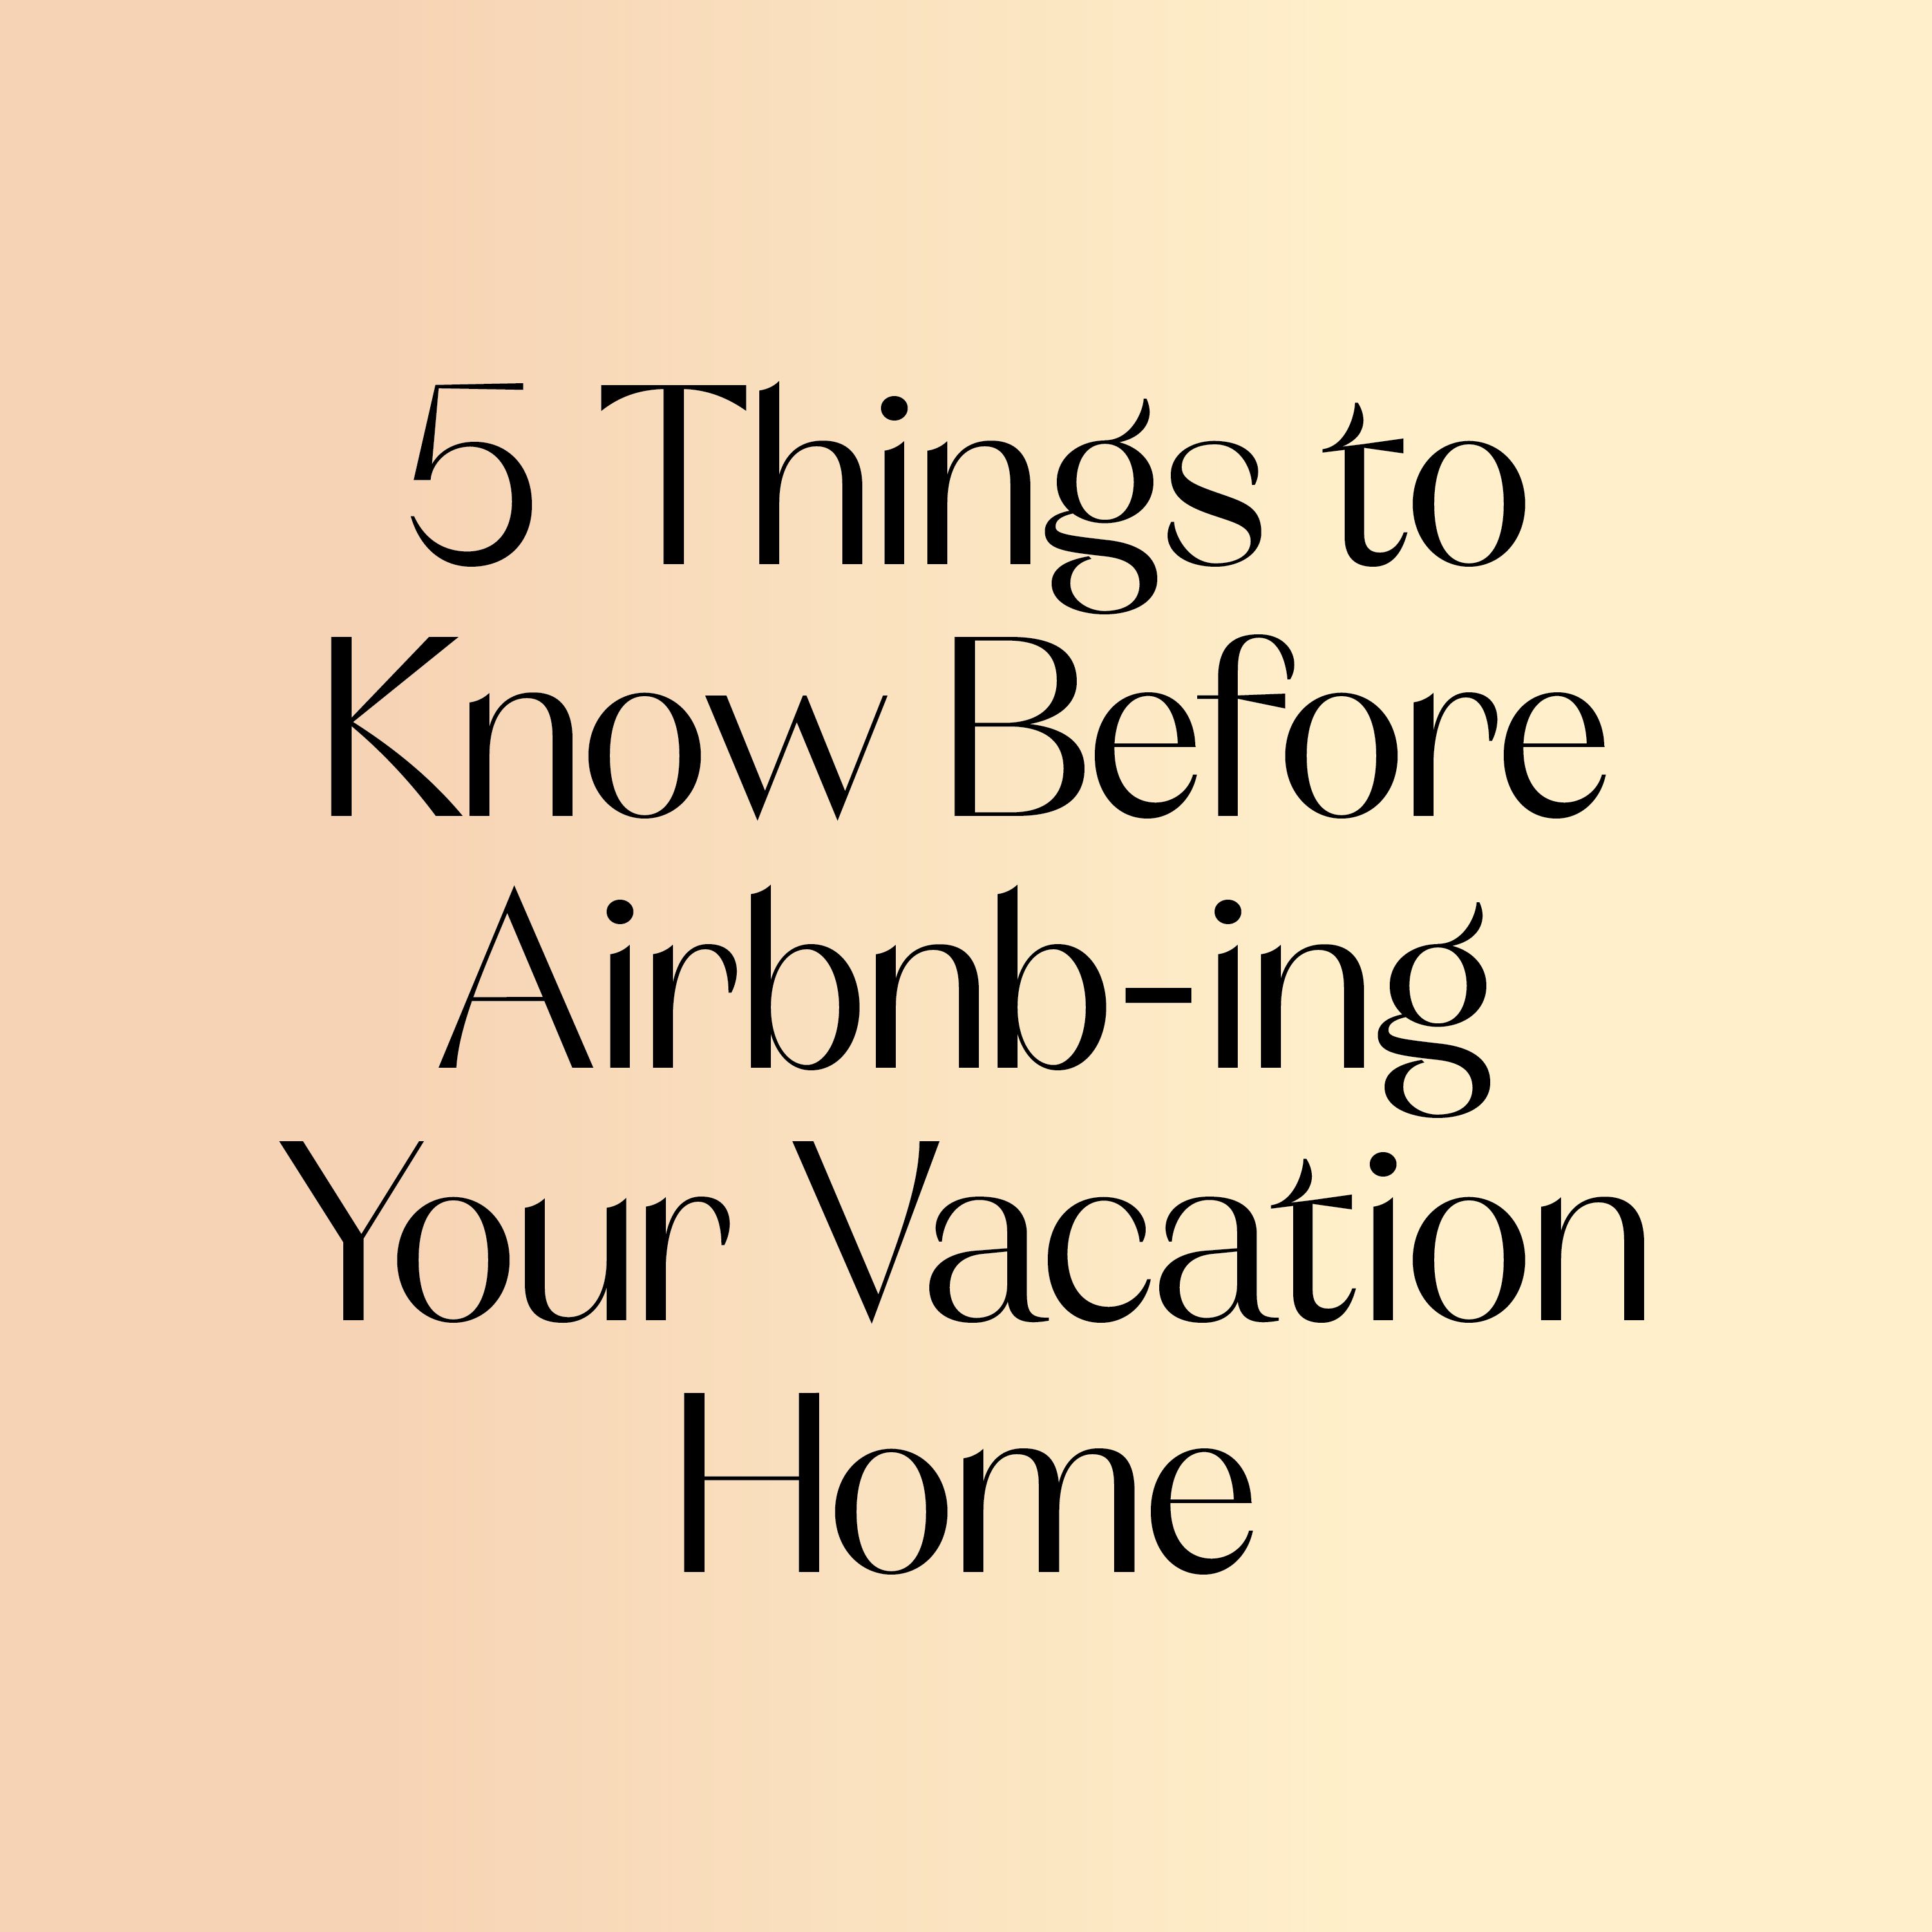 https://hips.hearstapps.com/hmg-prod/images/5-things-to-know-before-airbnb-ing-your-vacation-home-1586465770.jpg